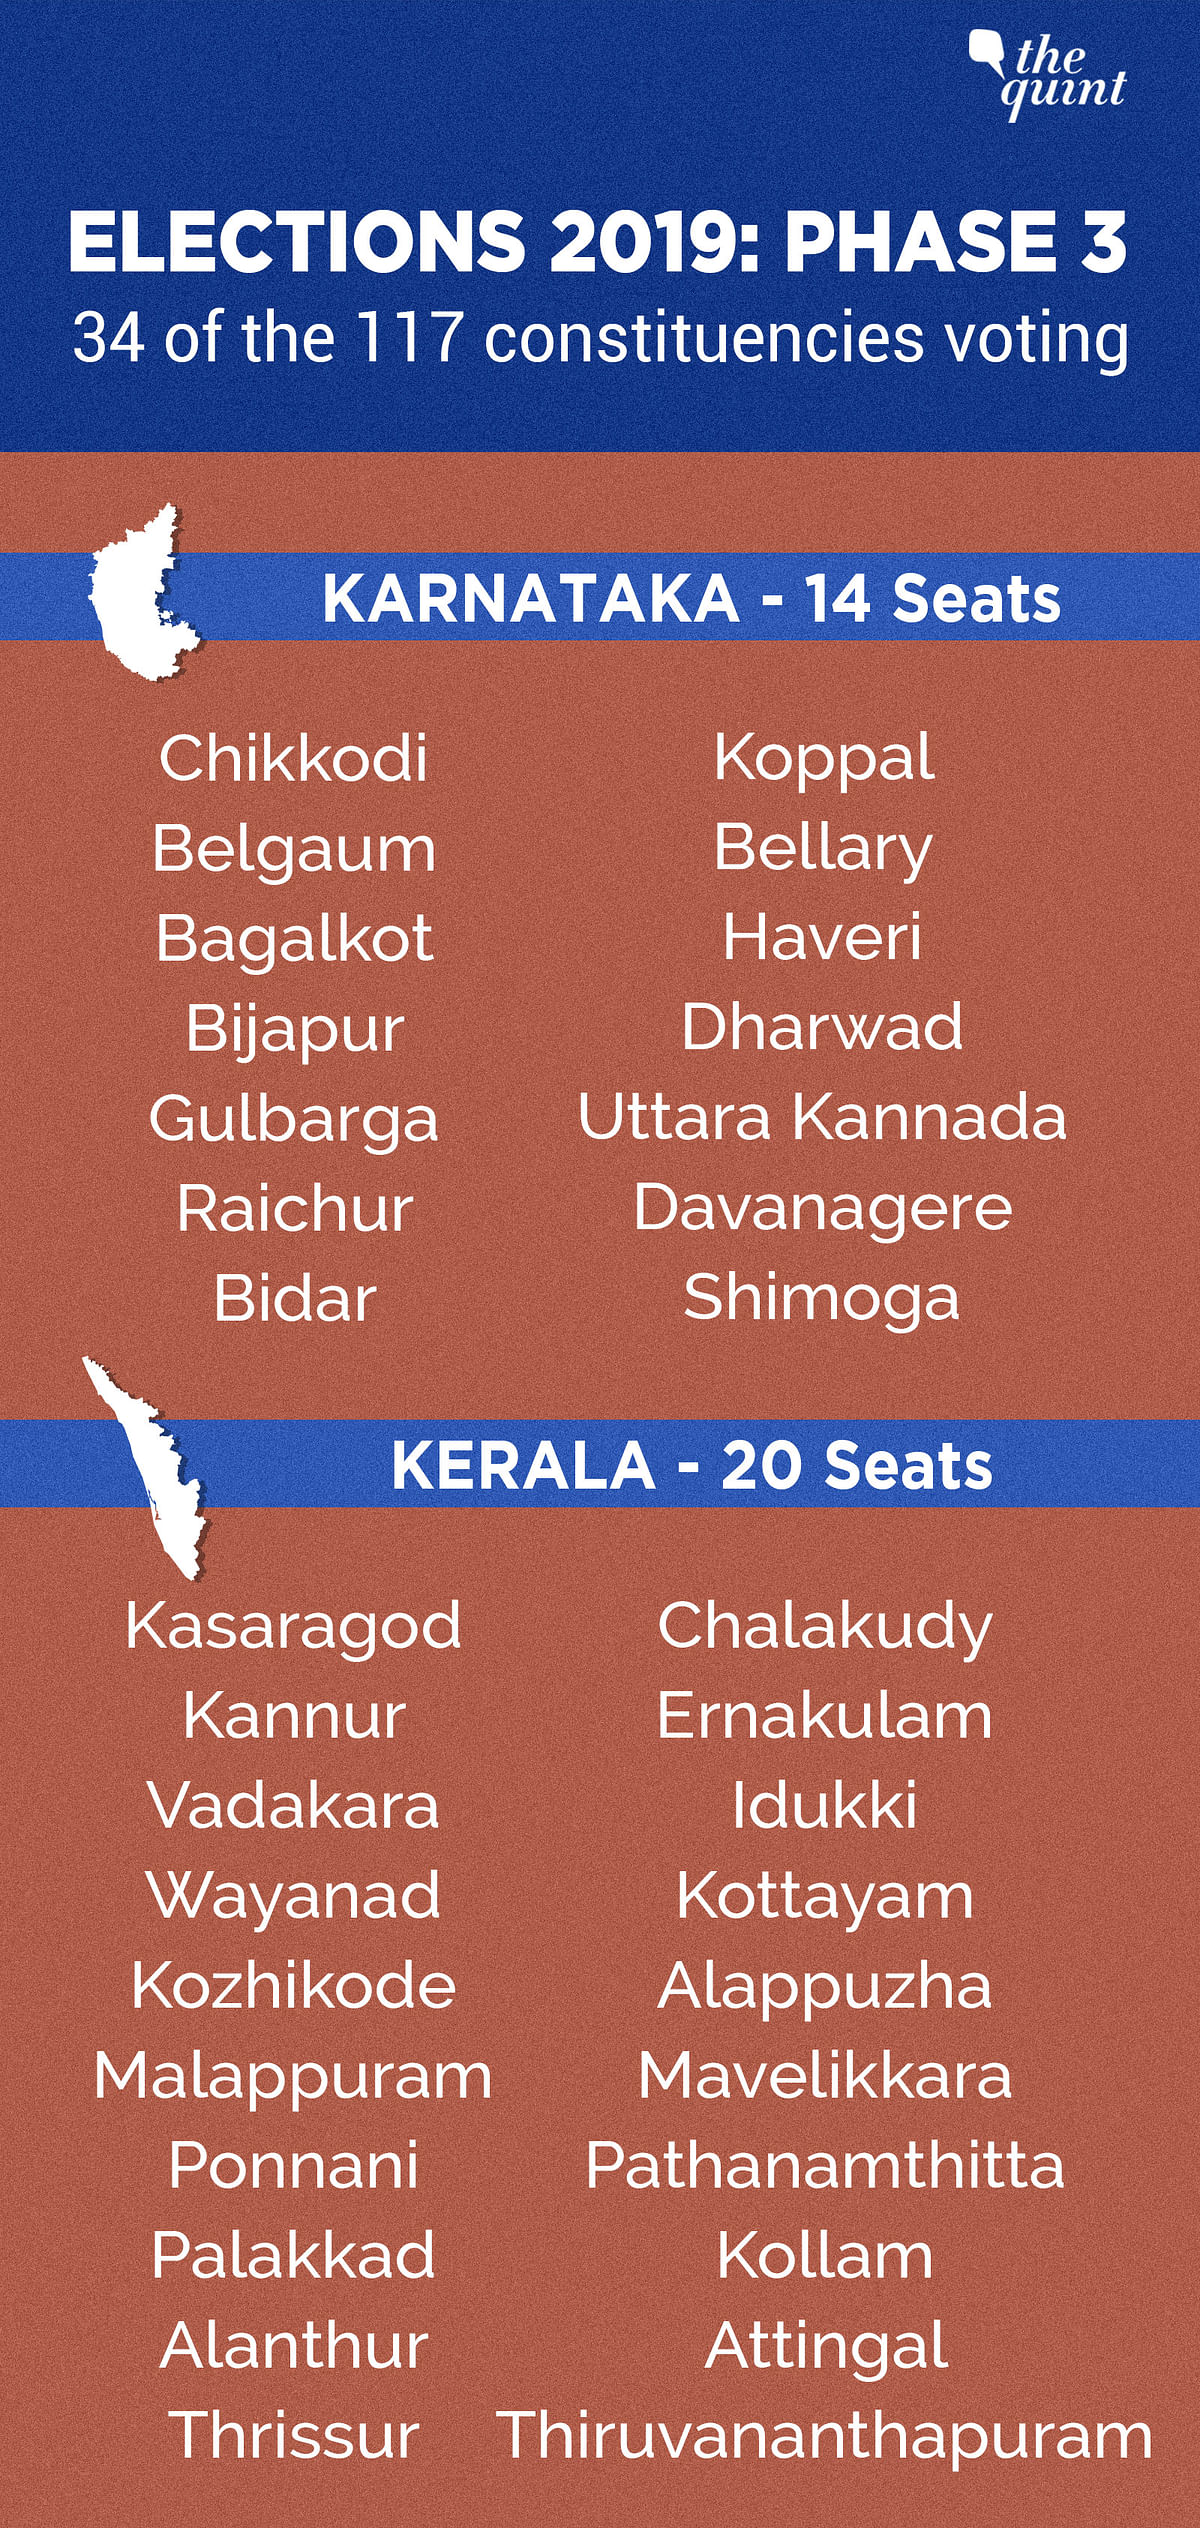 One of the key seats to watch will be Kerala’s Wayanad, where Congress President Rahul Gandhi is contesting from.